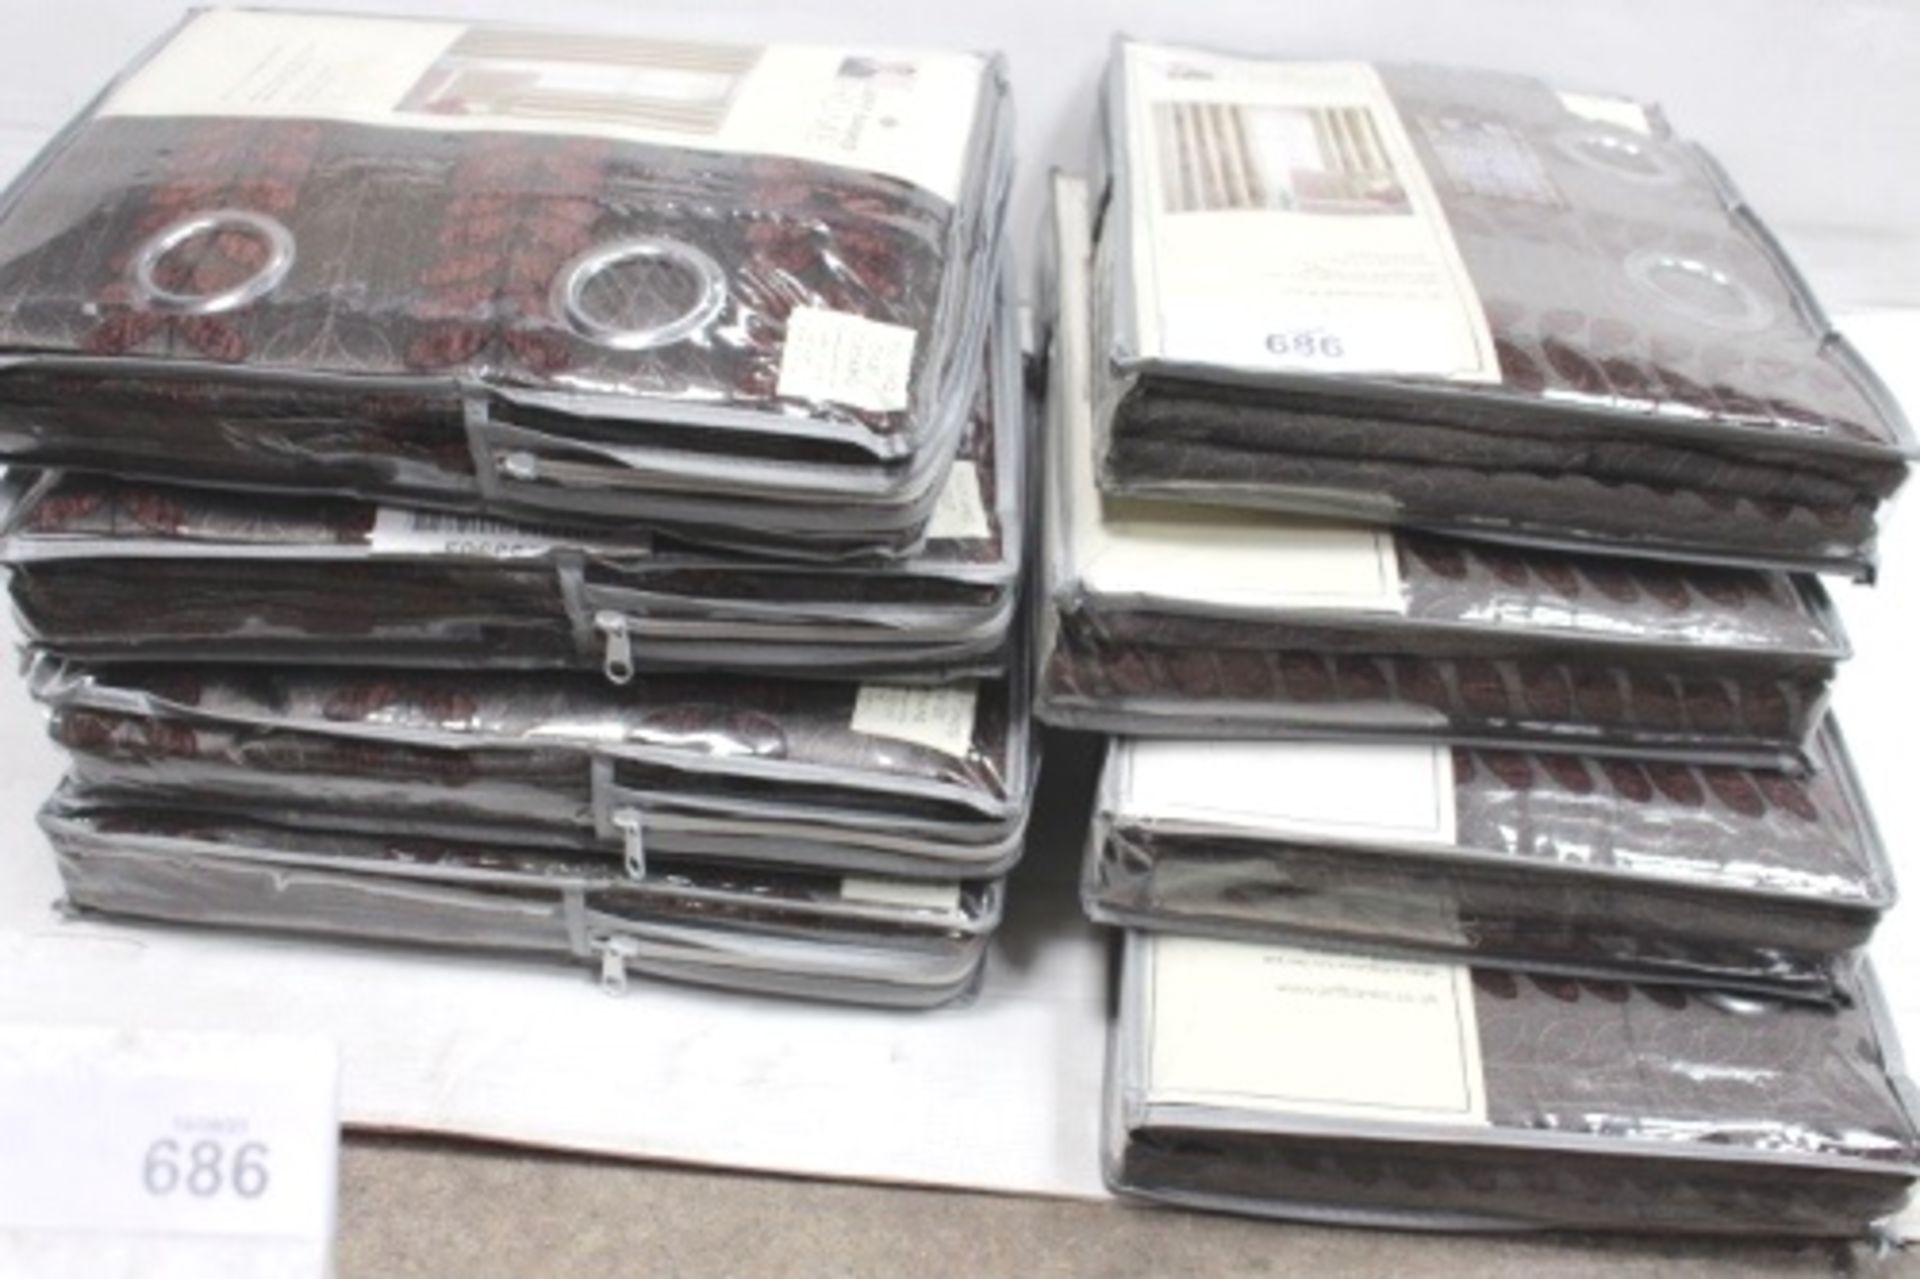 8 x pairs of Jeff Banks Home Sierra lined RME choc lined curtains, size 117 x 137cm - New in pack,